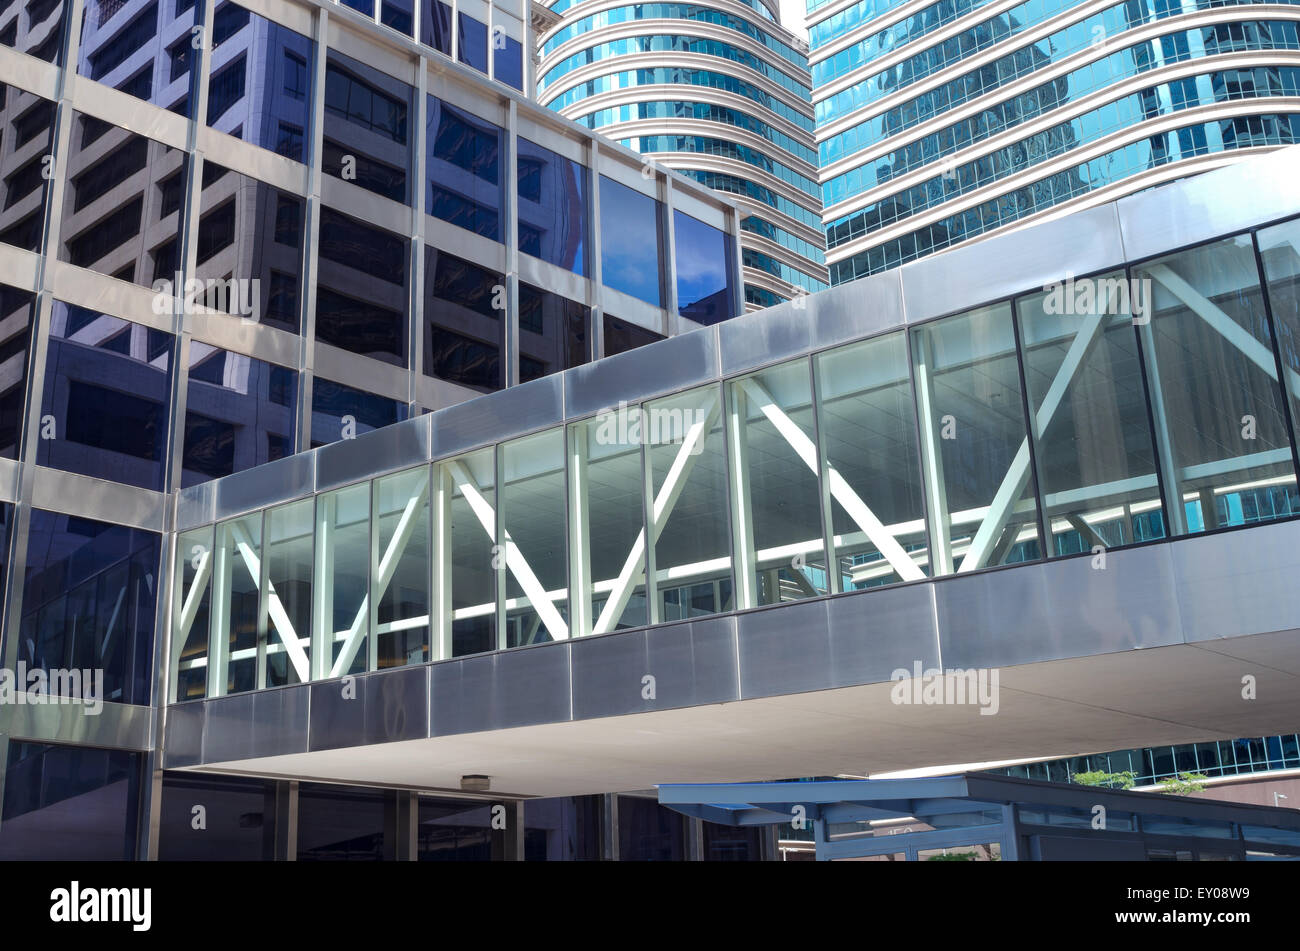 modern architecture of glass skyscrapers and reflections in windows with skyway over street Stock Photo